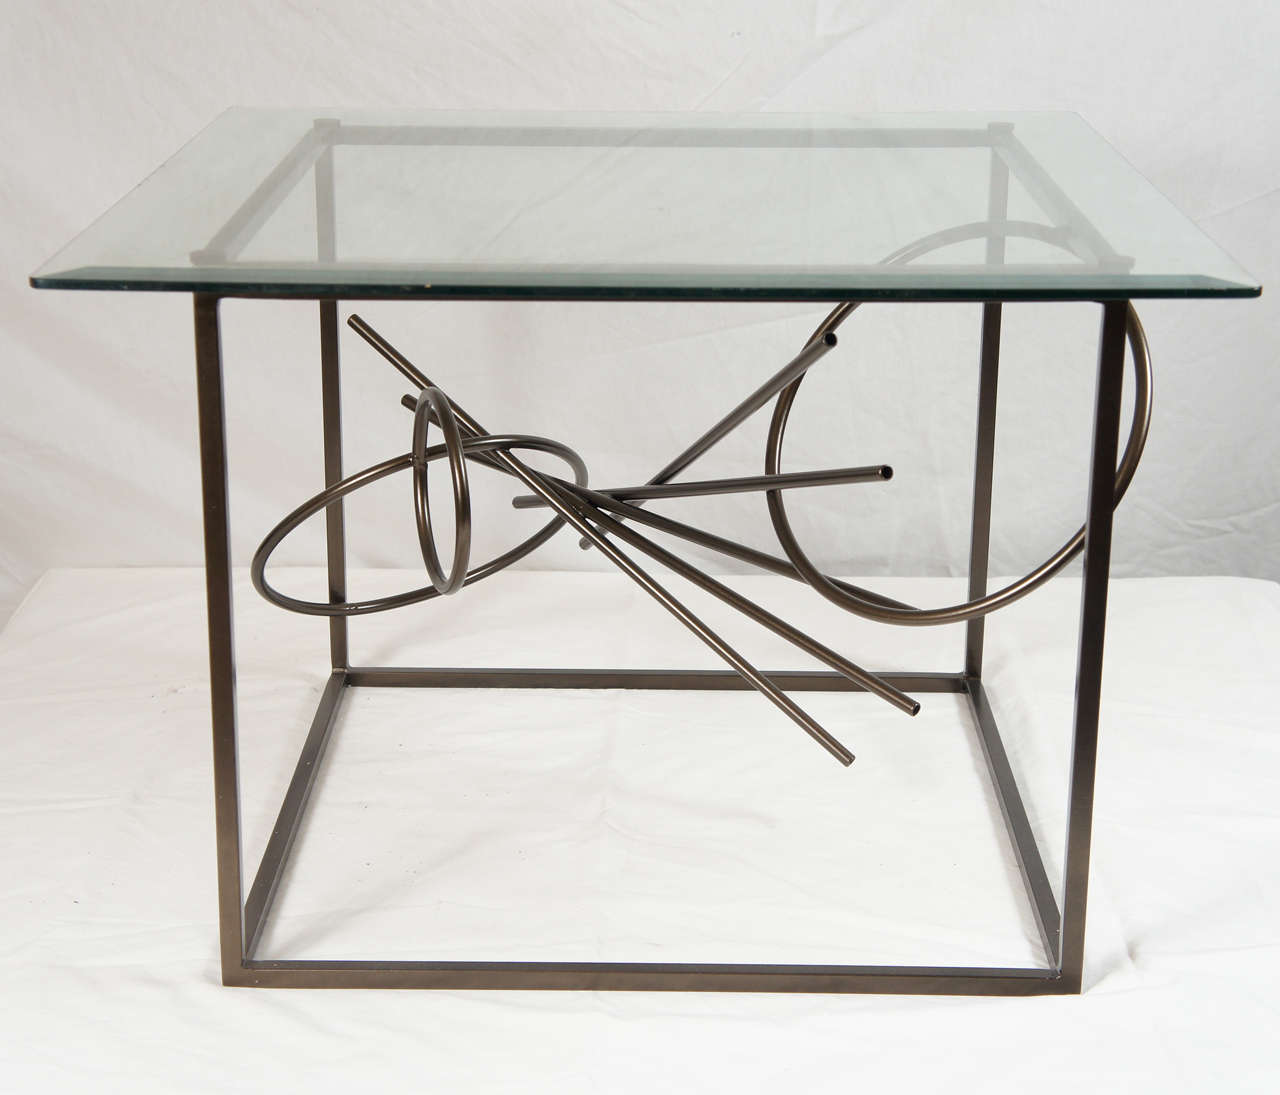 American Original Custom-Made in America, One of a Kind Sculptural Table by Lou Blass For Sale